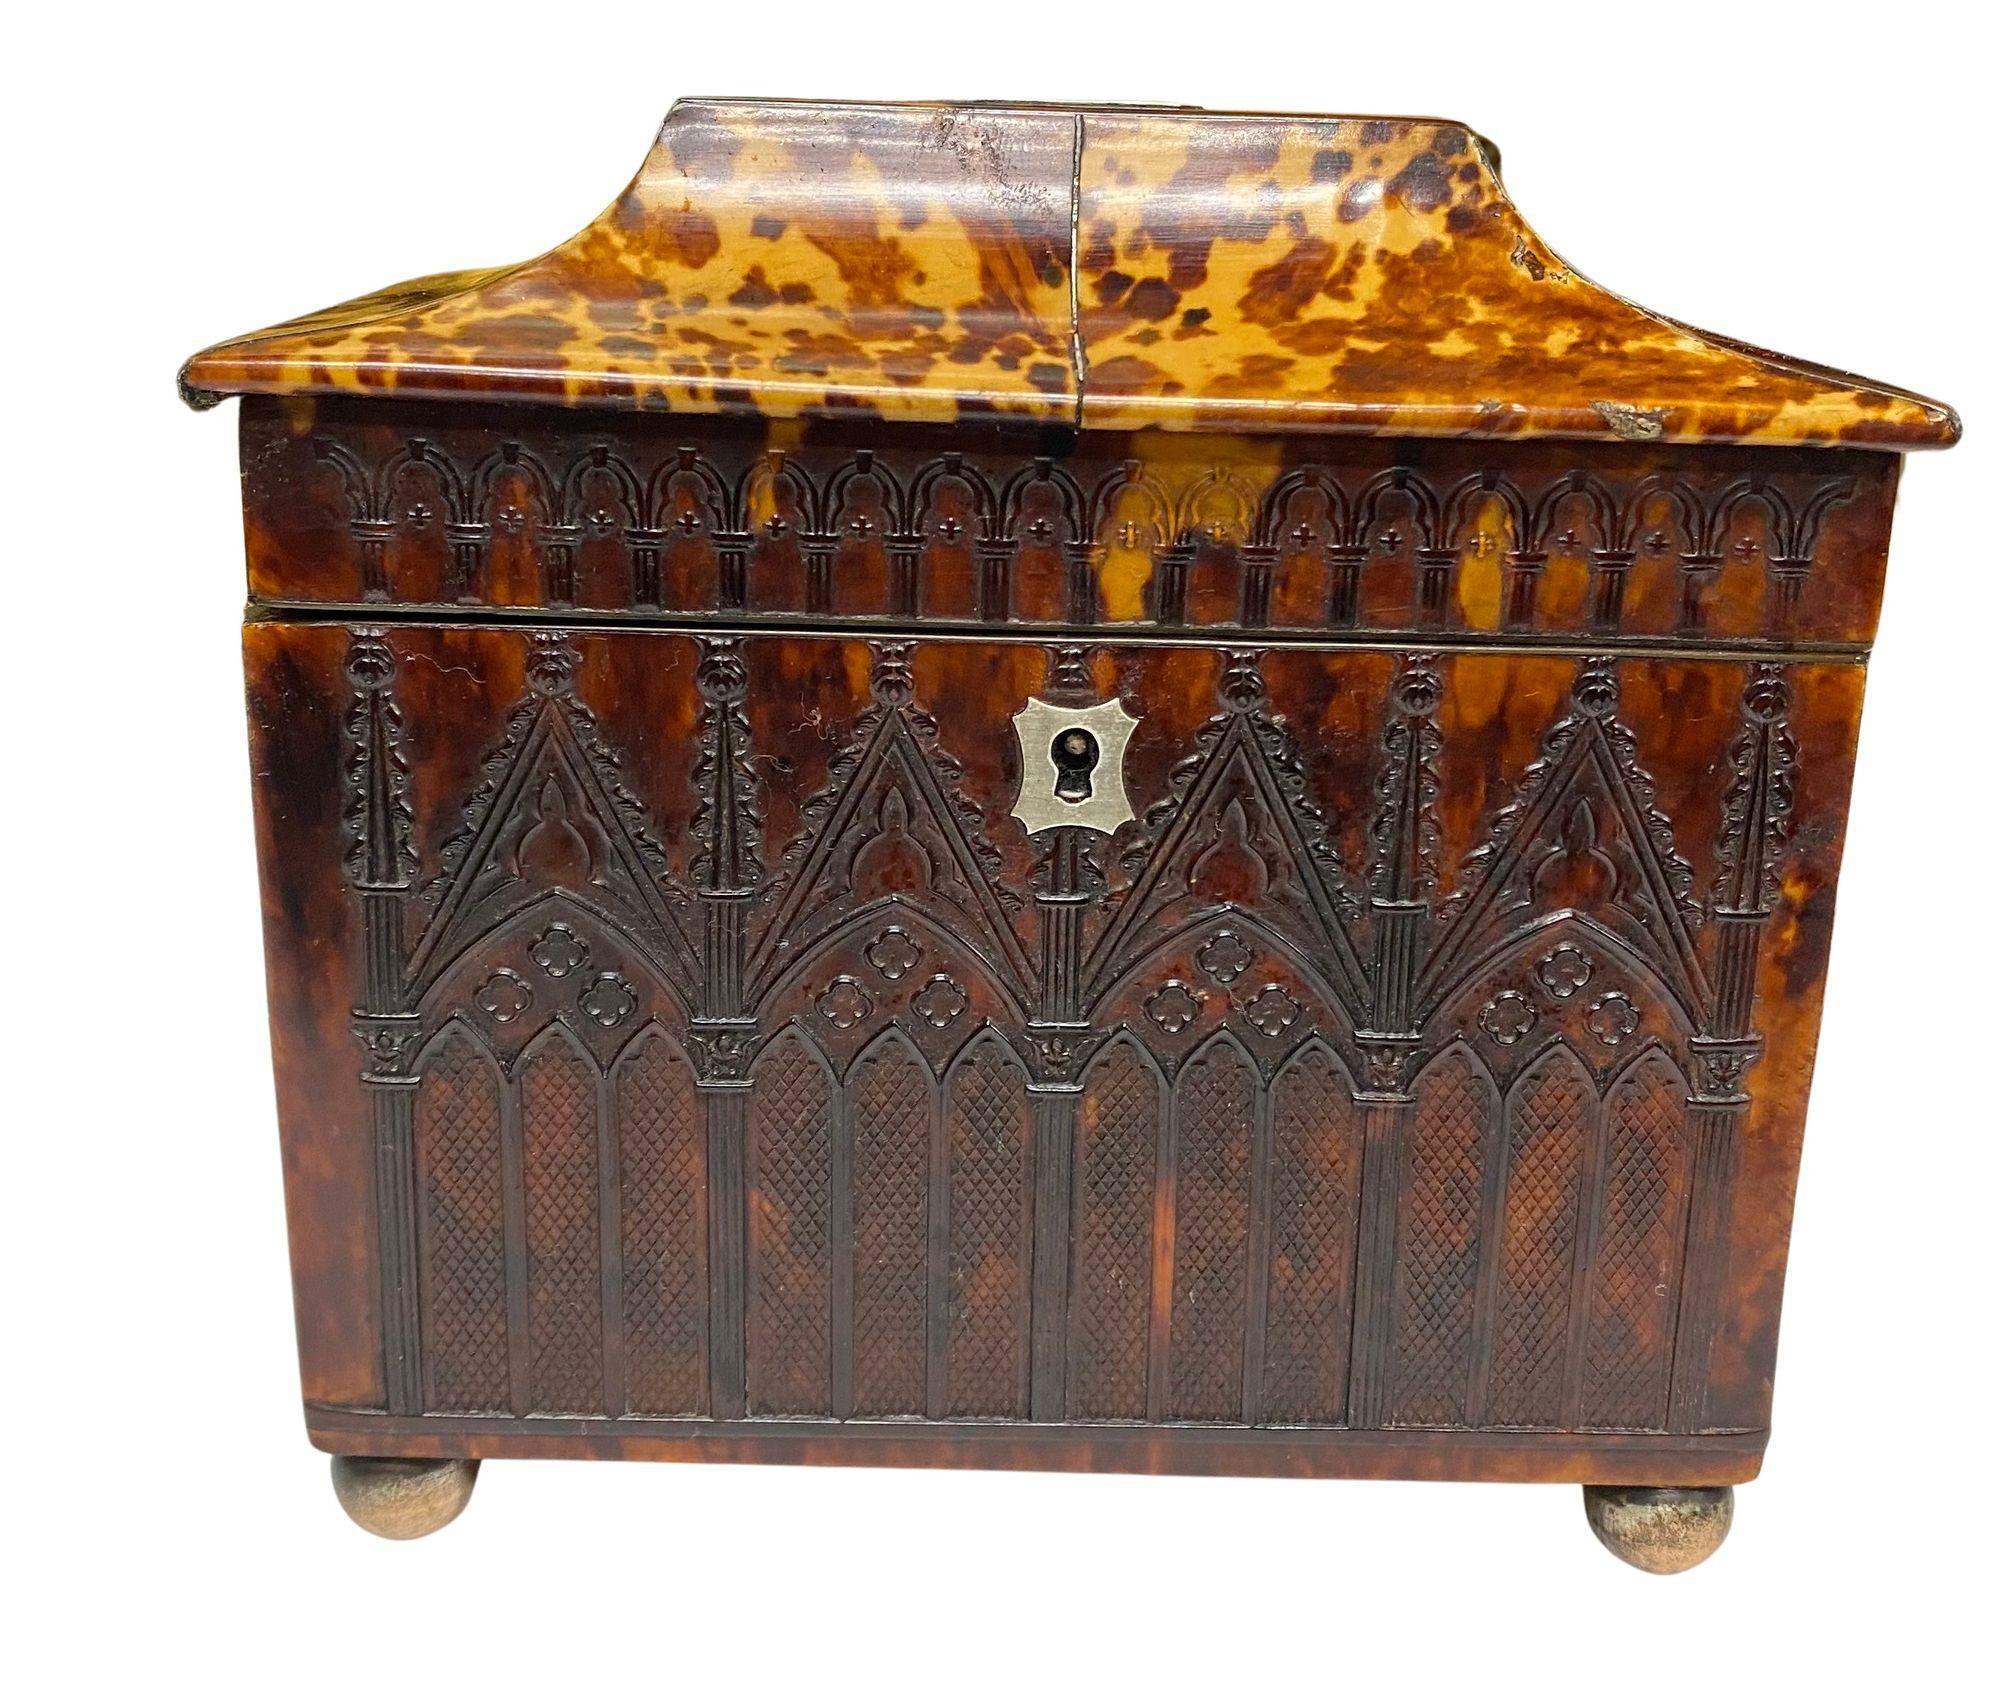 A rare and impressive Regency period Gothic influenced Tortoiseshell tea caddy, having wonderful embossed decoration to all four side and a pagoda style lid, opening to reveal two lidded compartments.